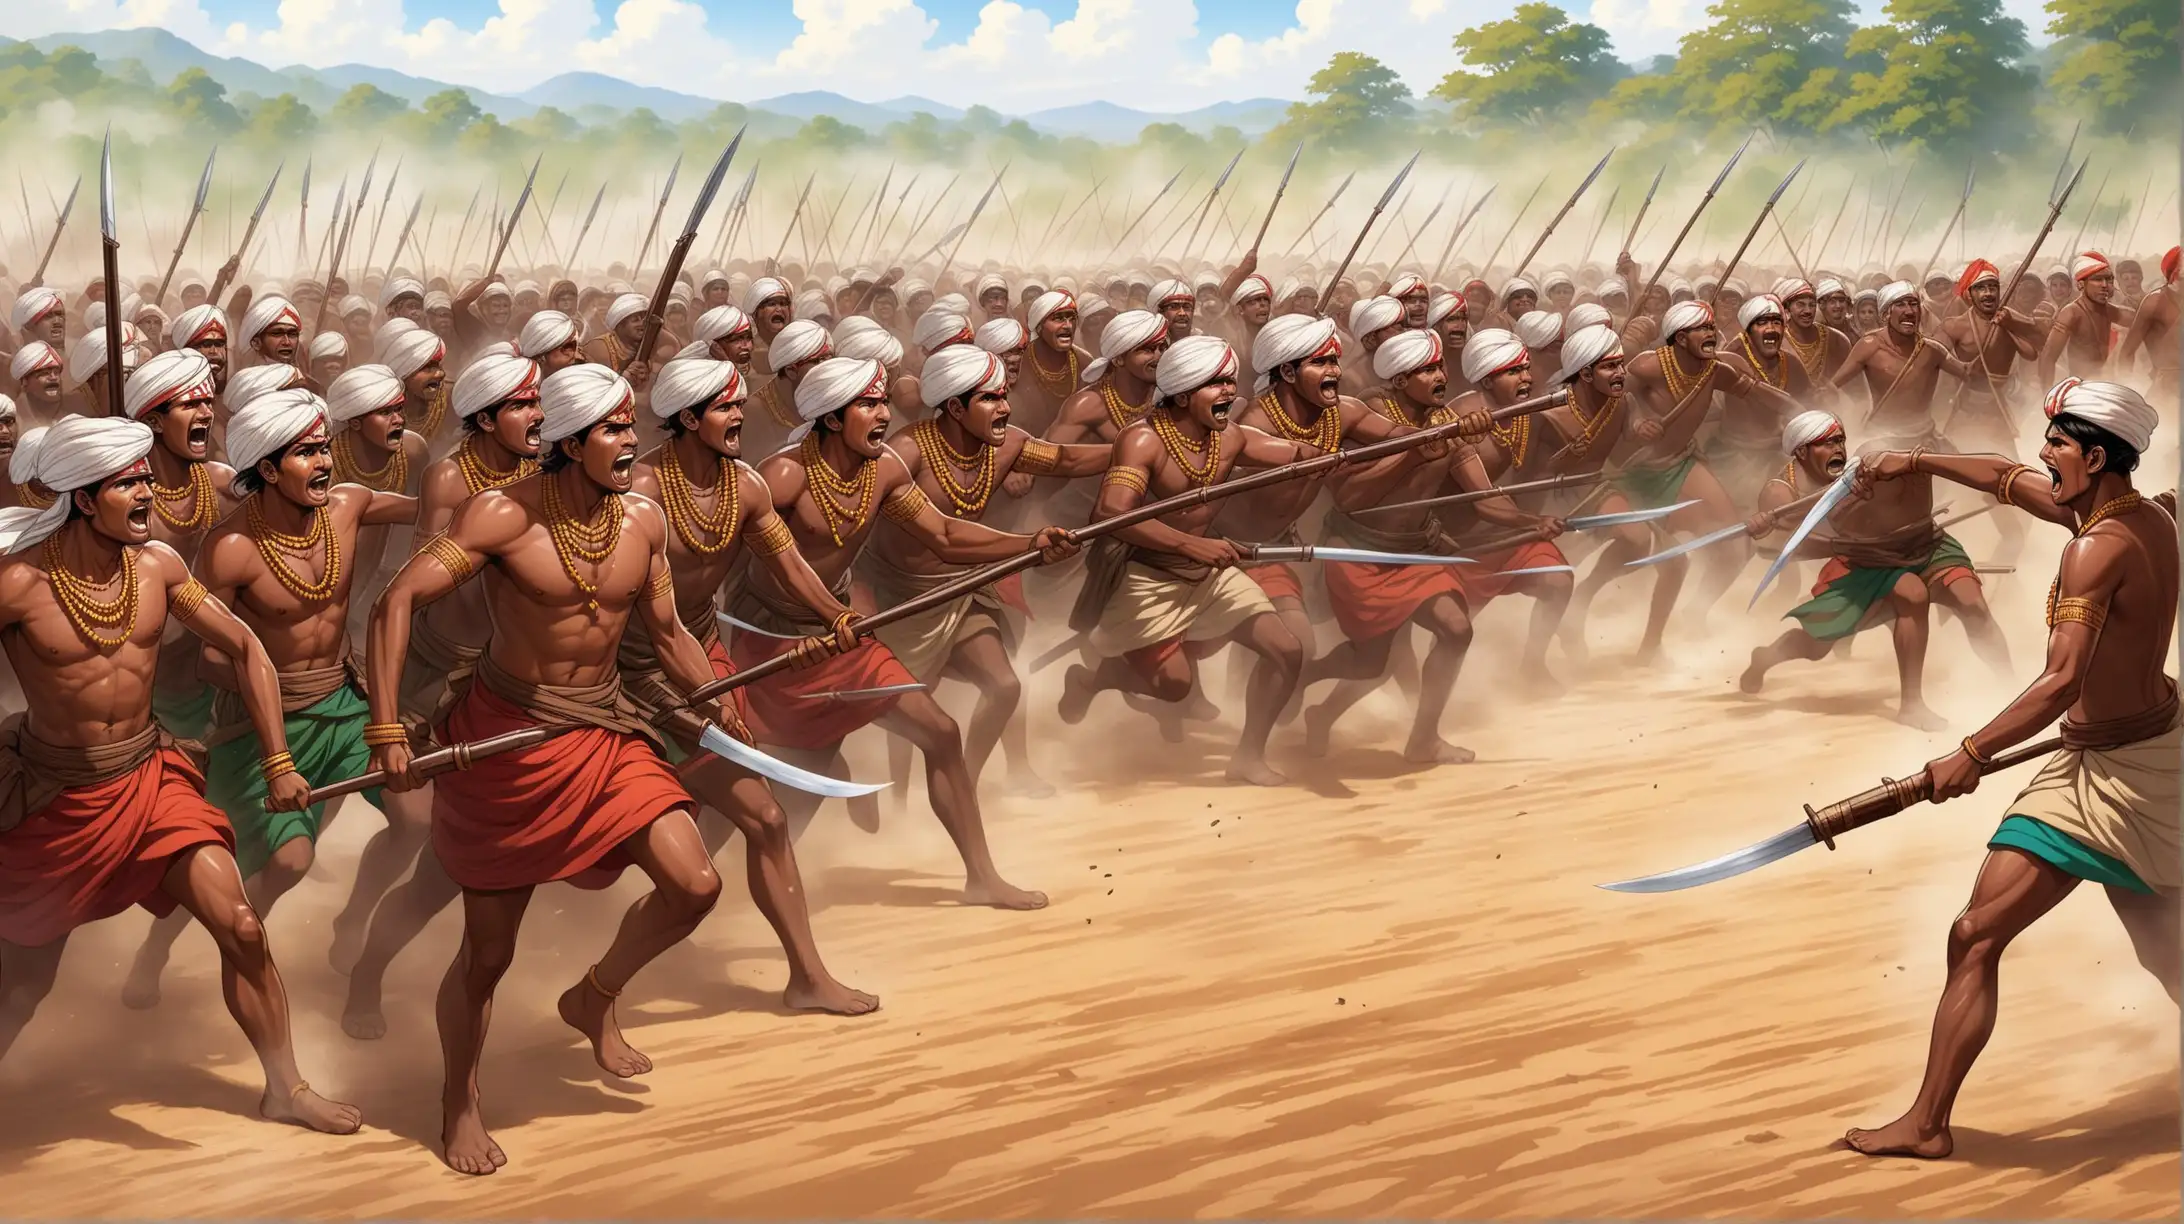 19th century British soldiers convey attacked by tribals